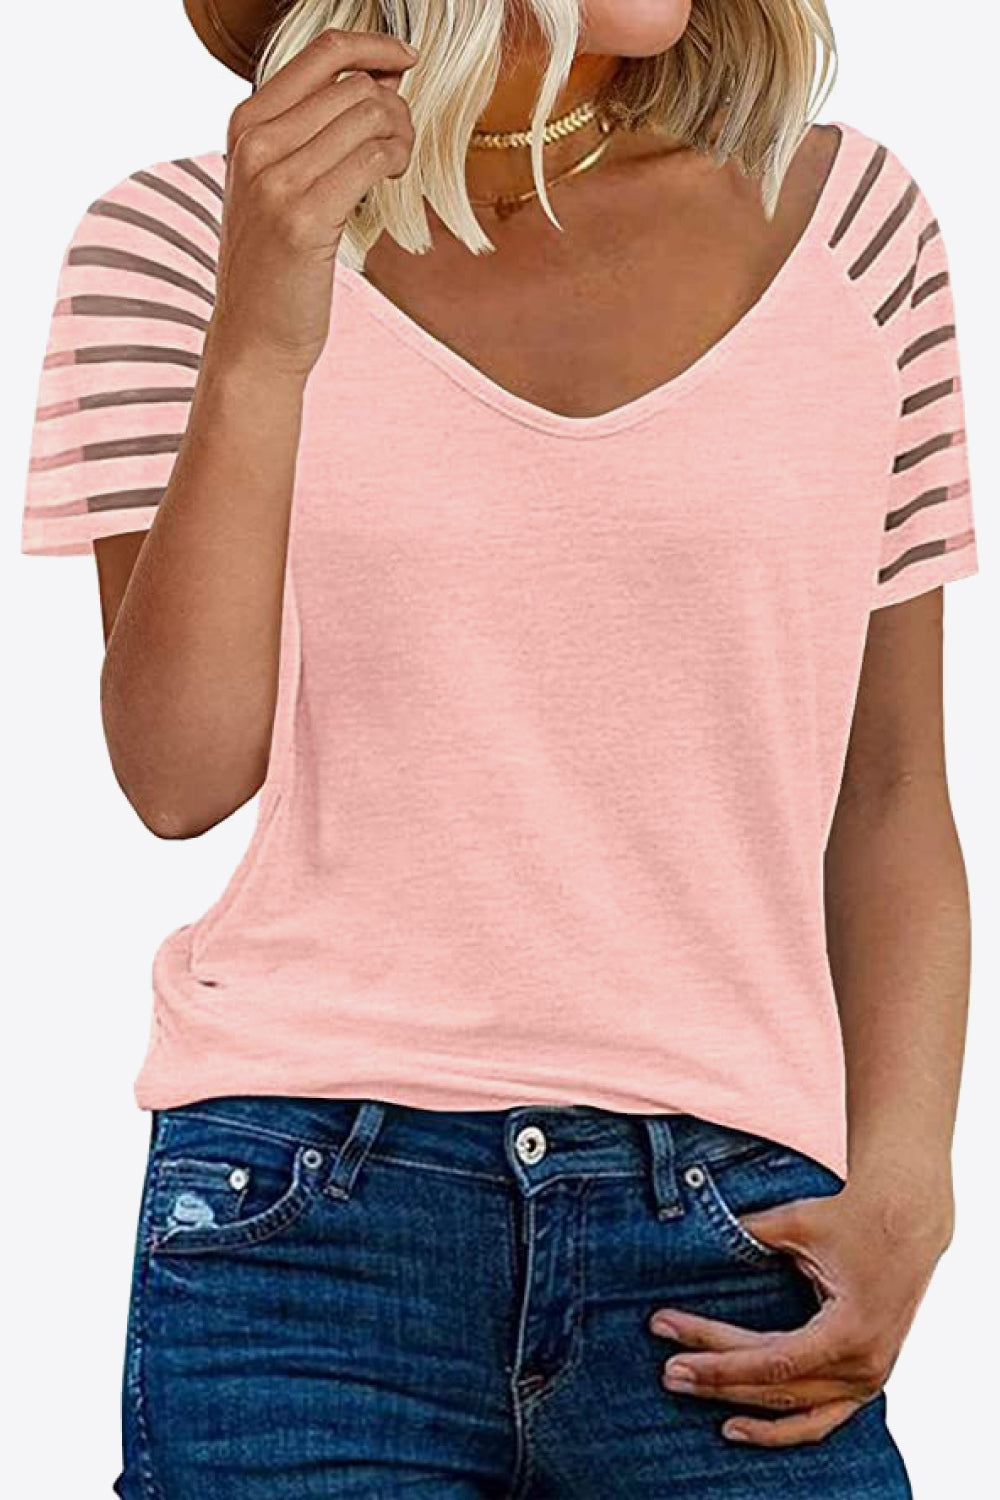 Peach Pink Soft Pink Peachy Pink Light Rose Womens Sheer Striped Sleeve Tee in 8 colors, Very Highly Stretchy Rayon Spandex Blend Fabric Material, True to Size Fit, Shortsleeve Tee, V-Neckline